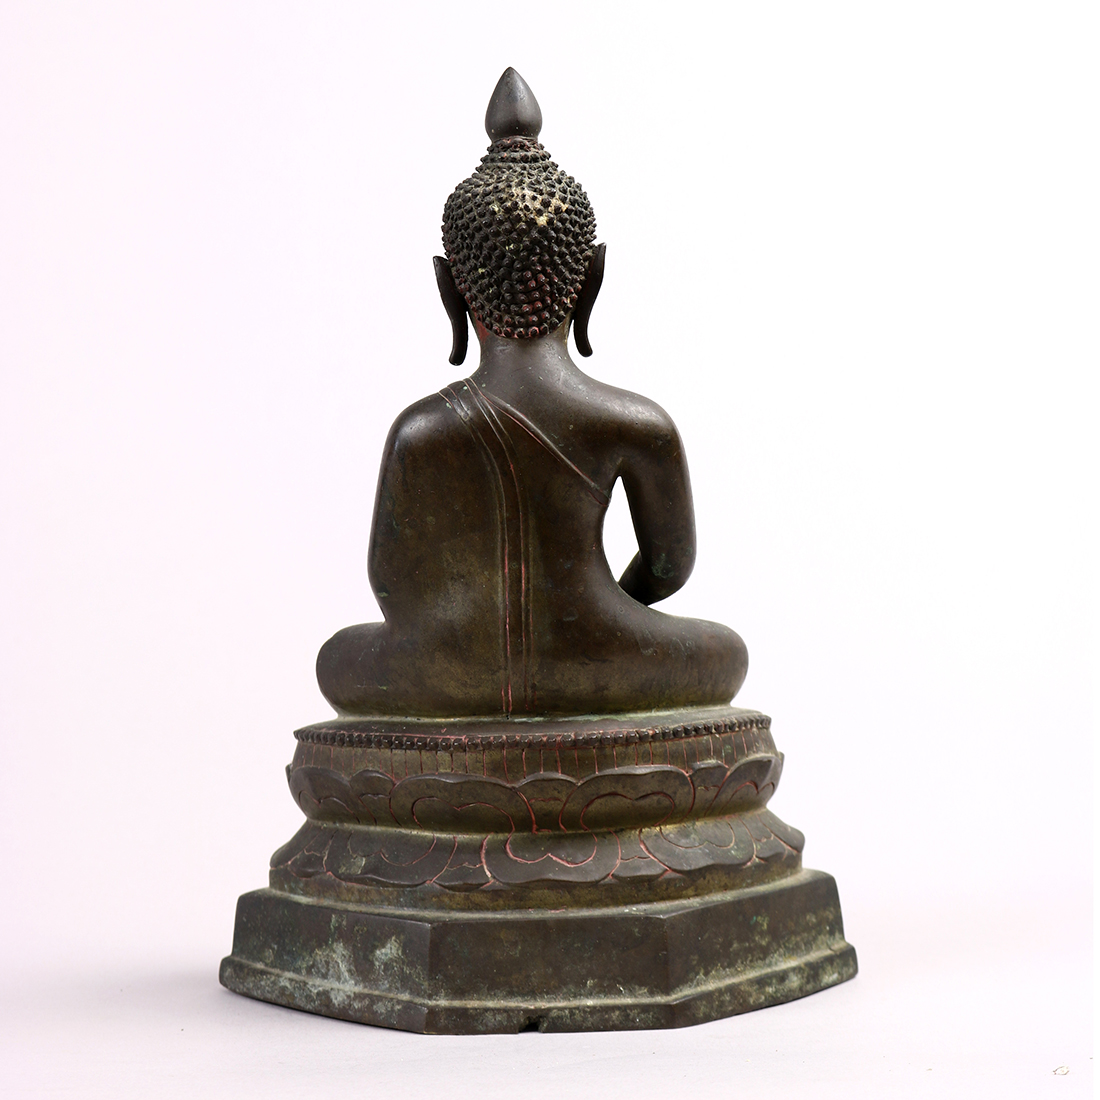 Thai bronze Buddha, 19th century, seated and in dhyana mudra on a double lotus pedestal, 7.5"h - Image 4 of 7